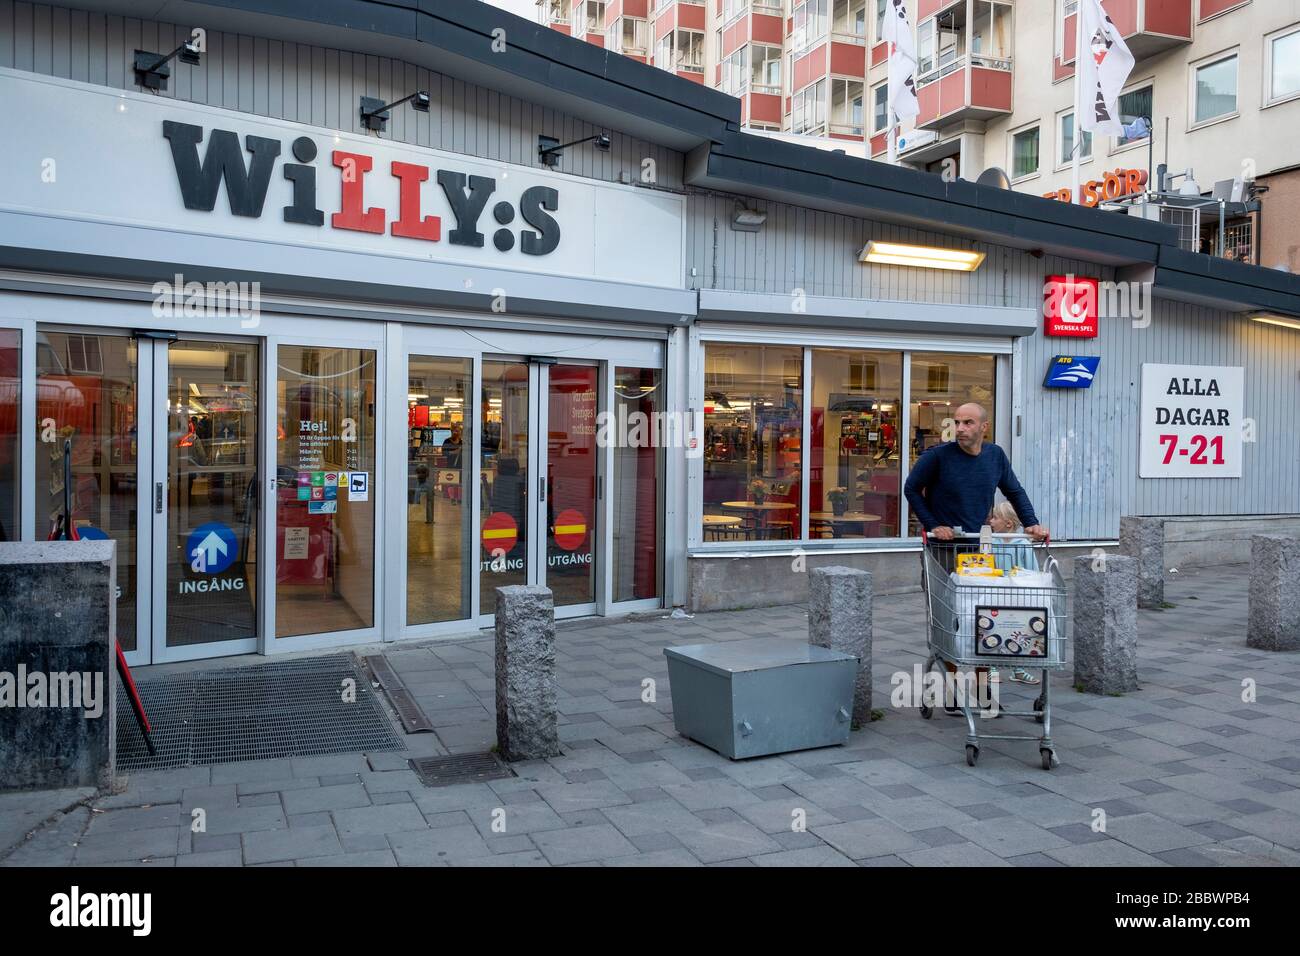 Willys discount grocery chain in Gothenburg, Sweden, Europe Stock Photo